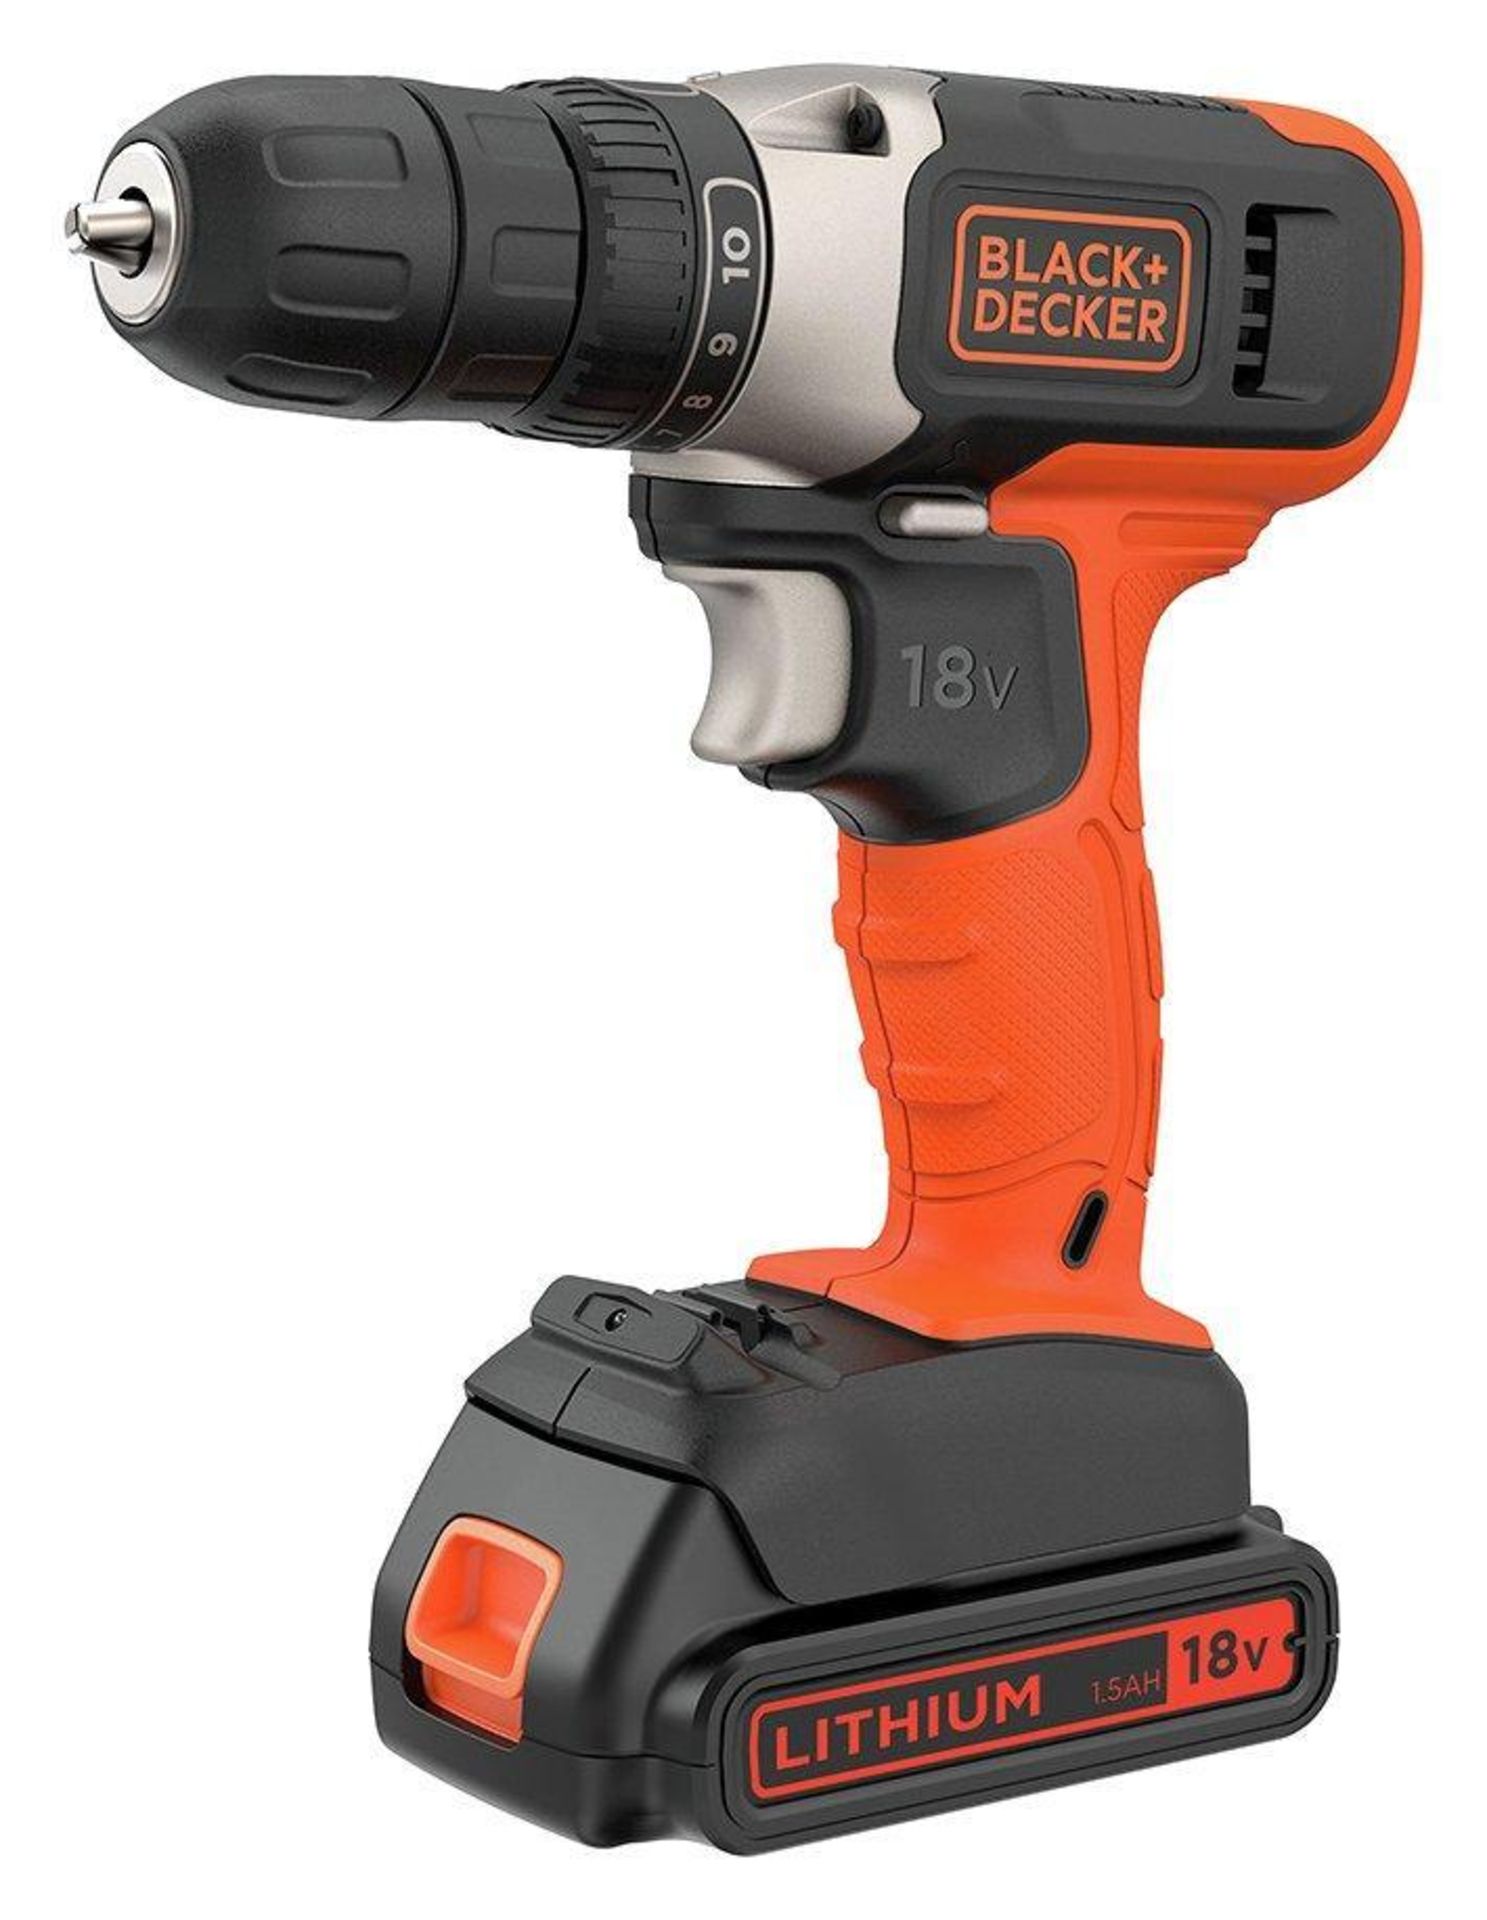 Black + Decker 18V Lithium-ion Drill Driver with Accessories, £50.00 RRP